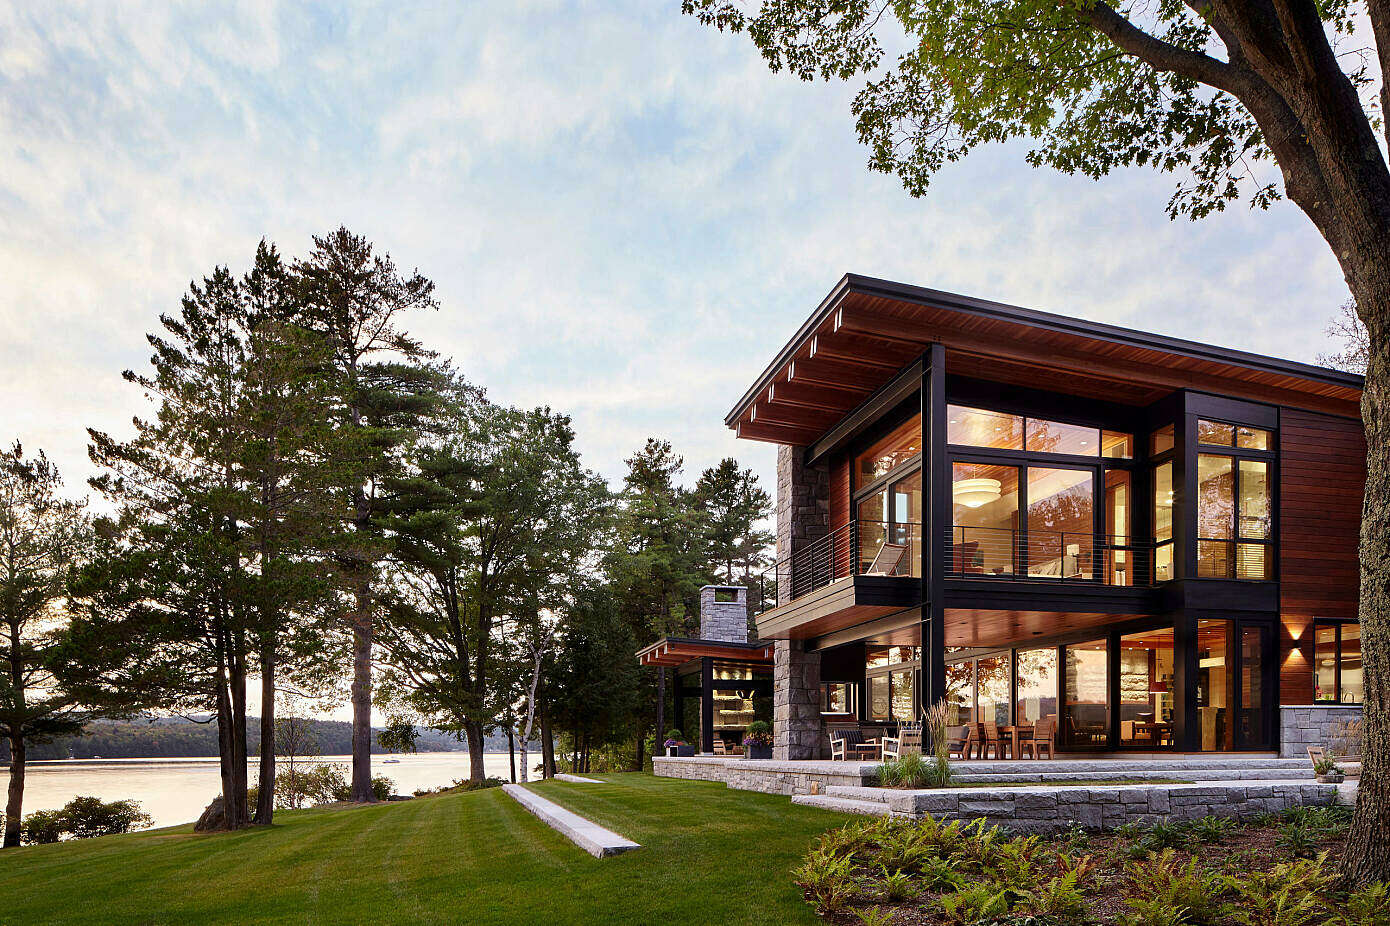 Lake Point House by Marcus Gleysteen Architects